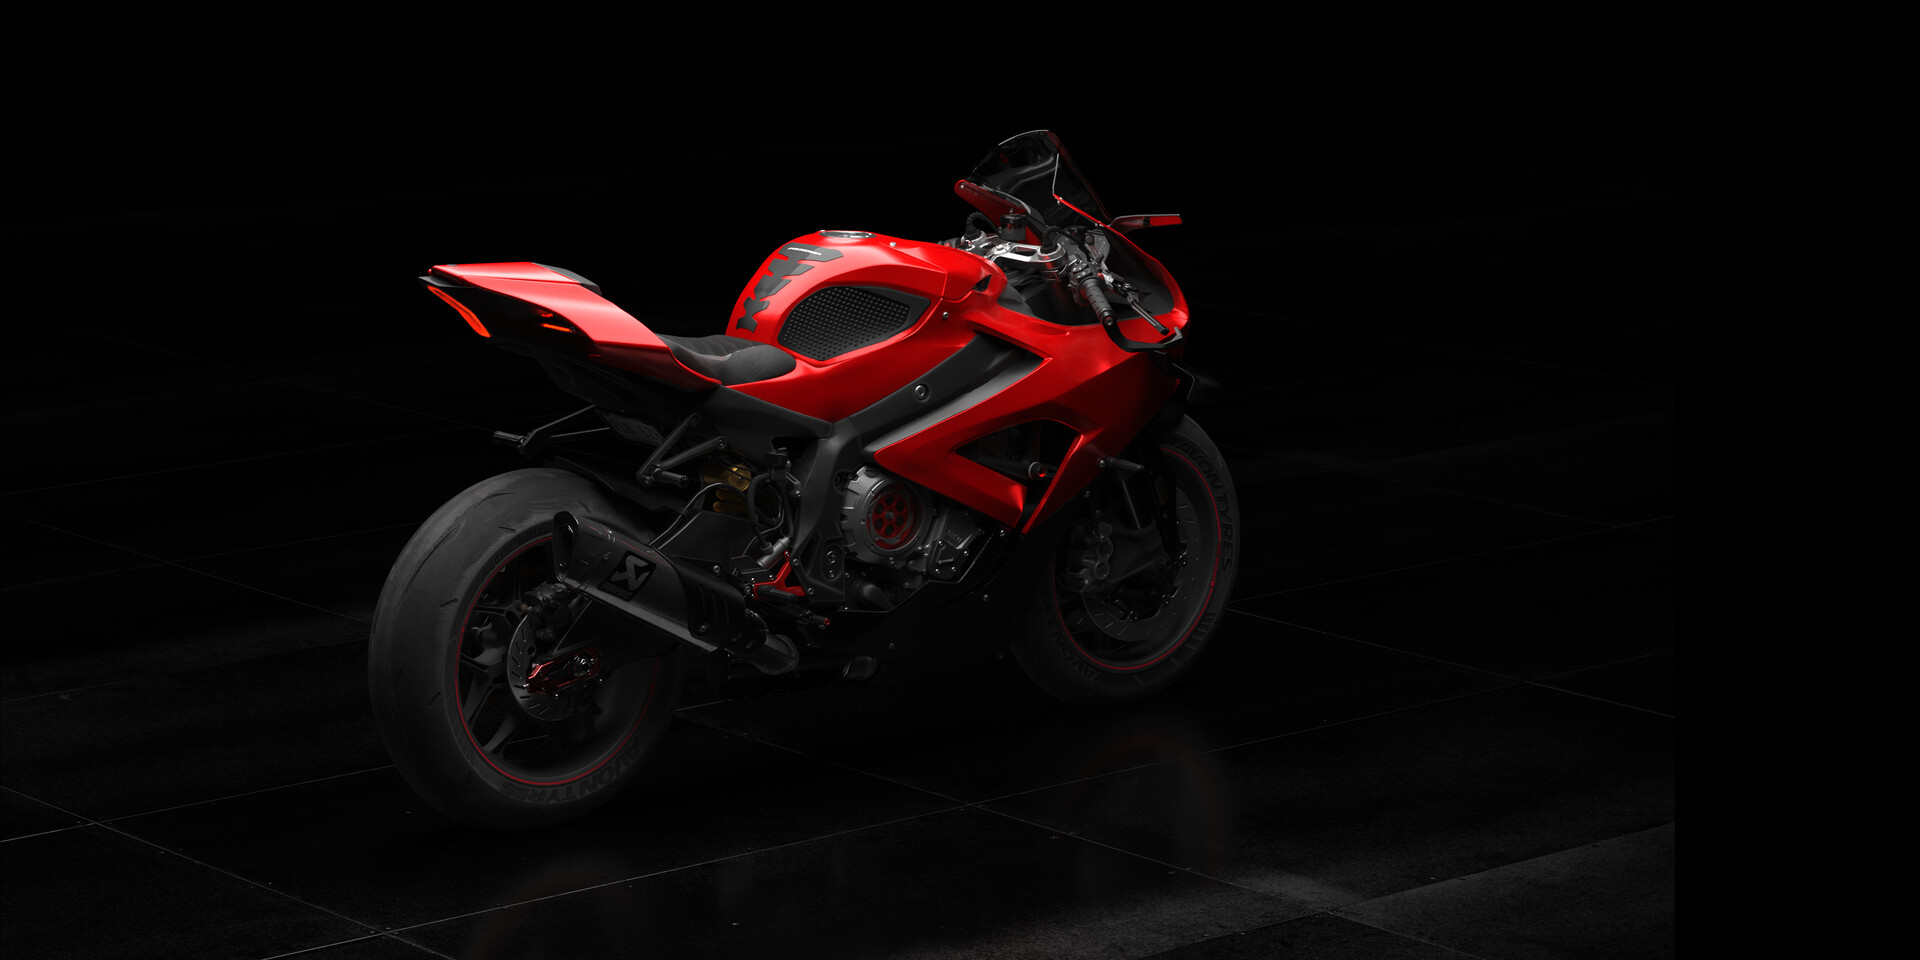 ArtStation - Motorcycle (Black and Red)